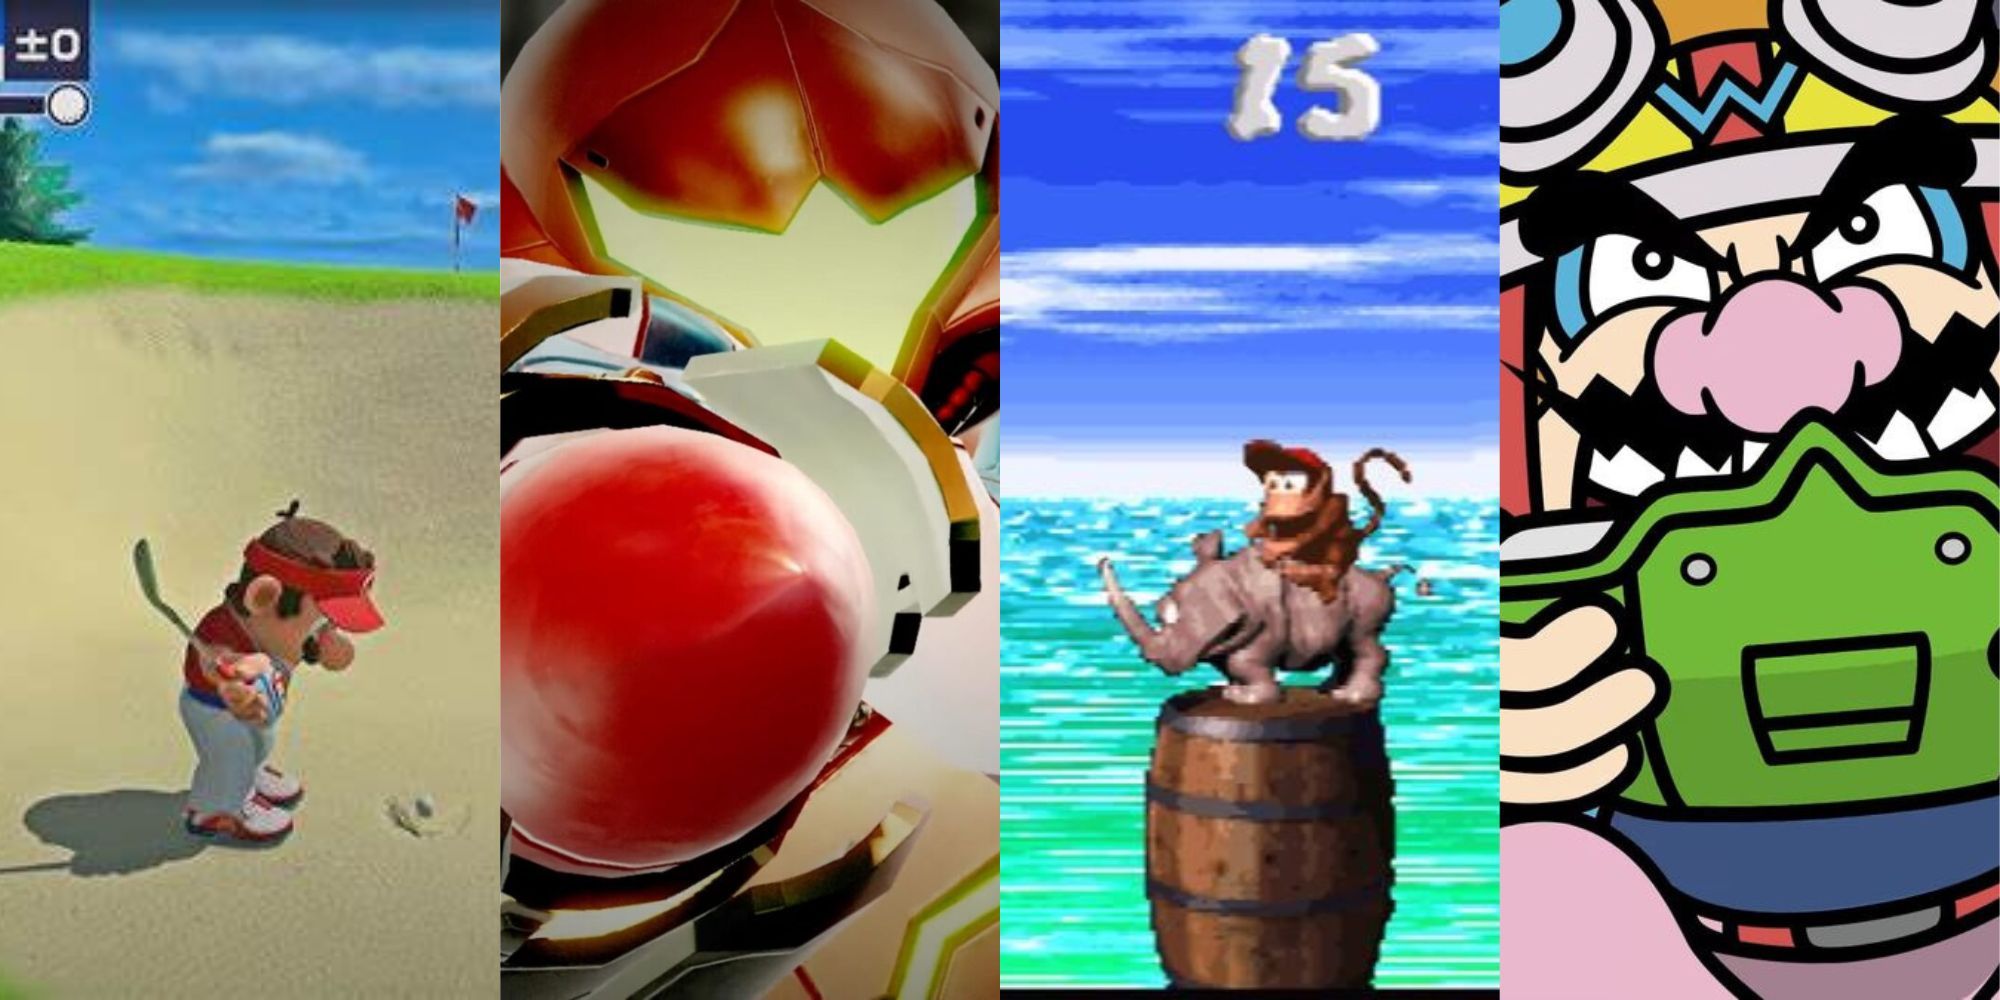 Mario playing golf from Super Rush, Samus Aran from Metroid Dread, Diddy Kong on Rhino from Donkey Kong Country 2: Diddy Kong's Quest, and Wario playing game from Warioware